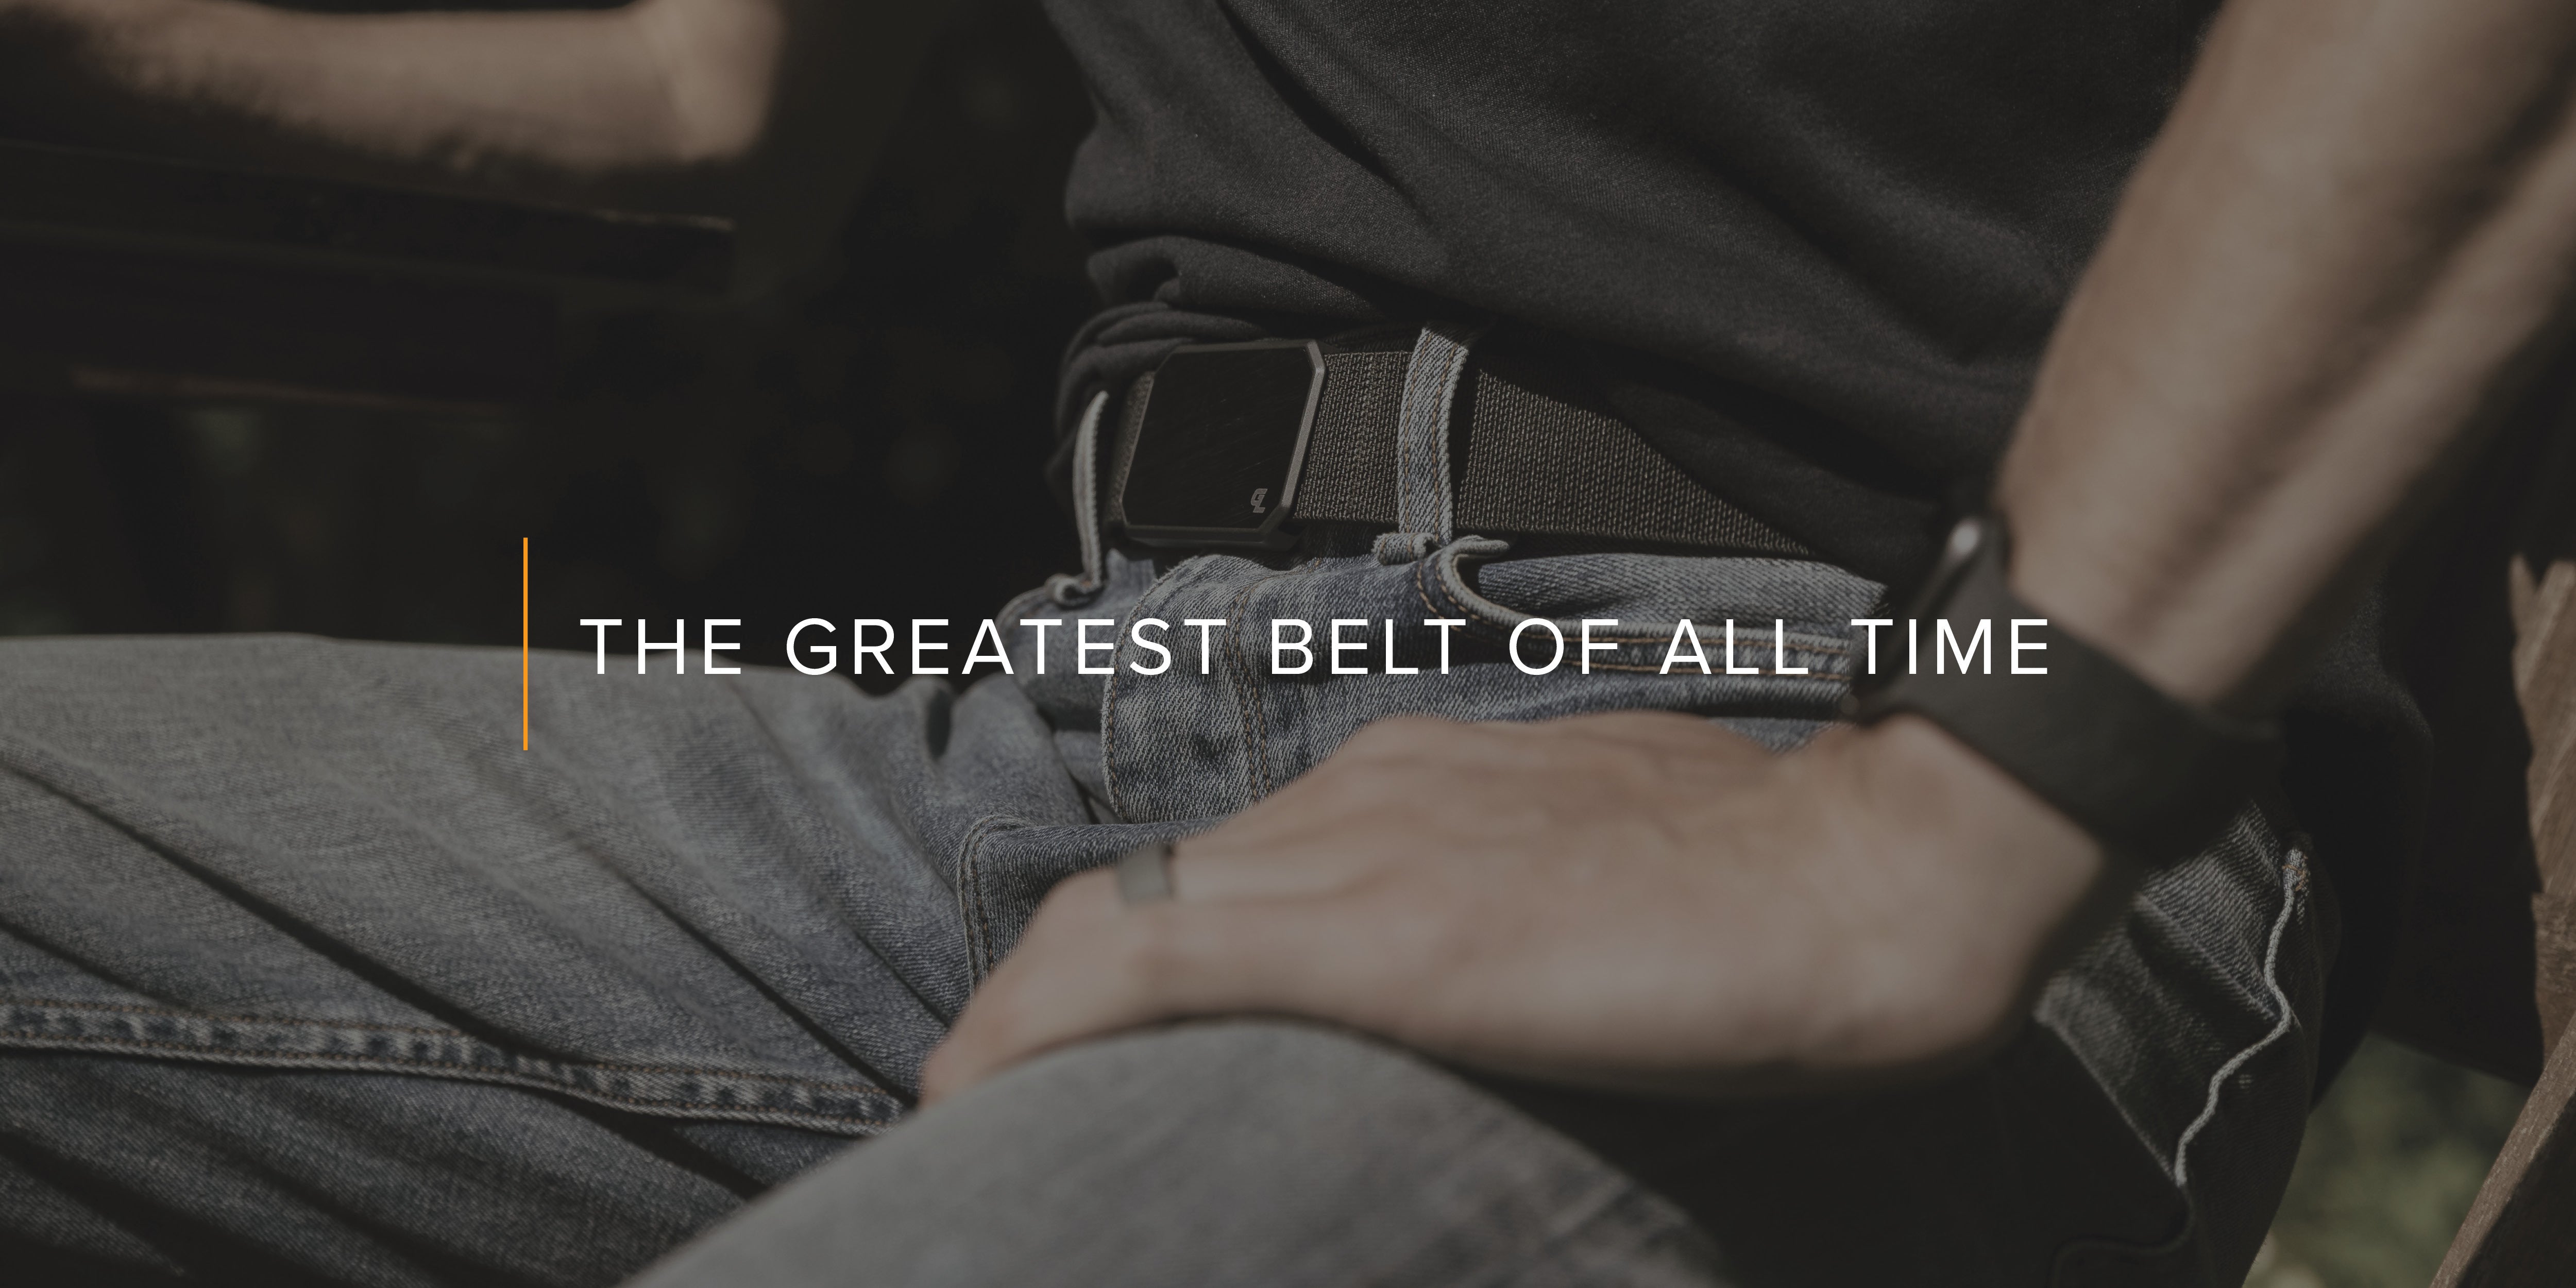 The Greatest Belt of All Time